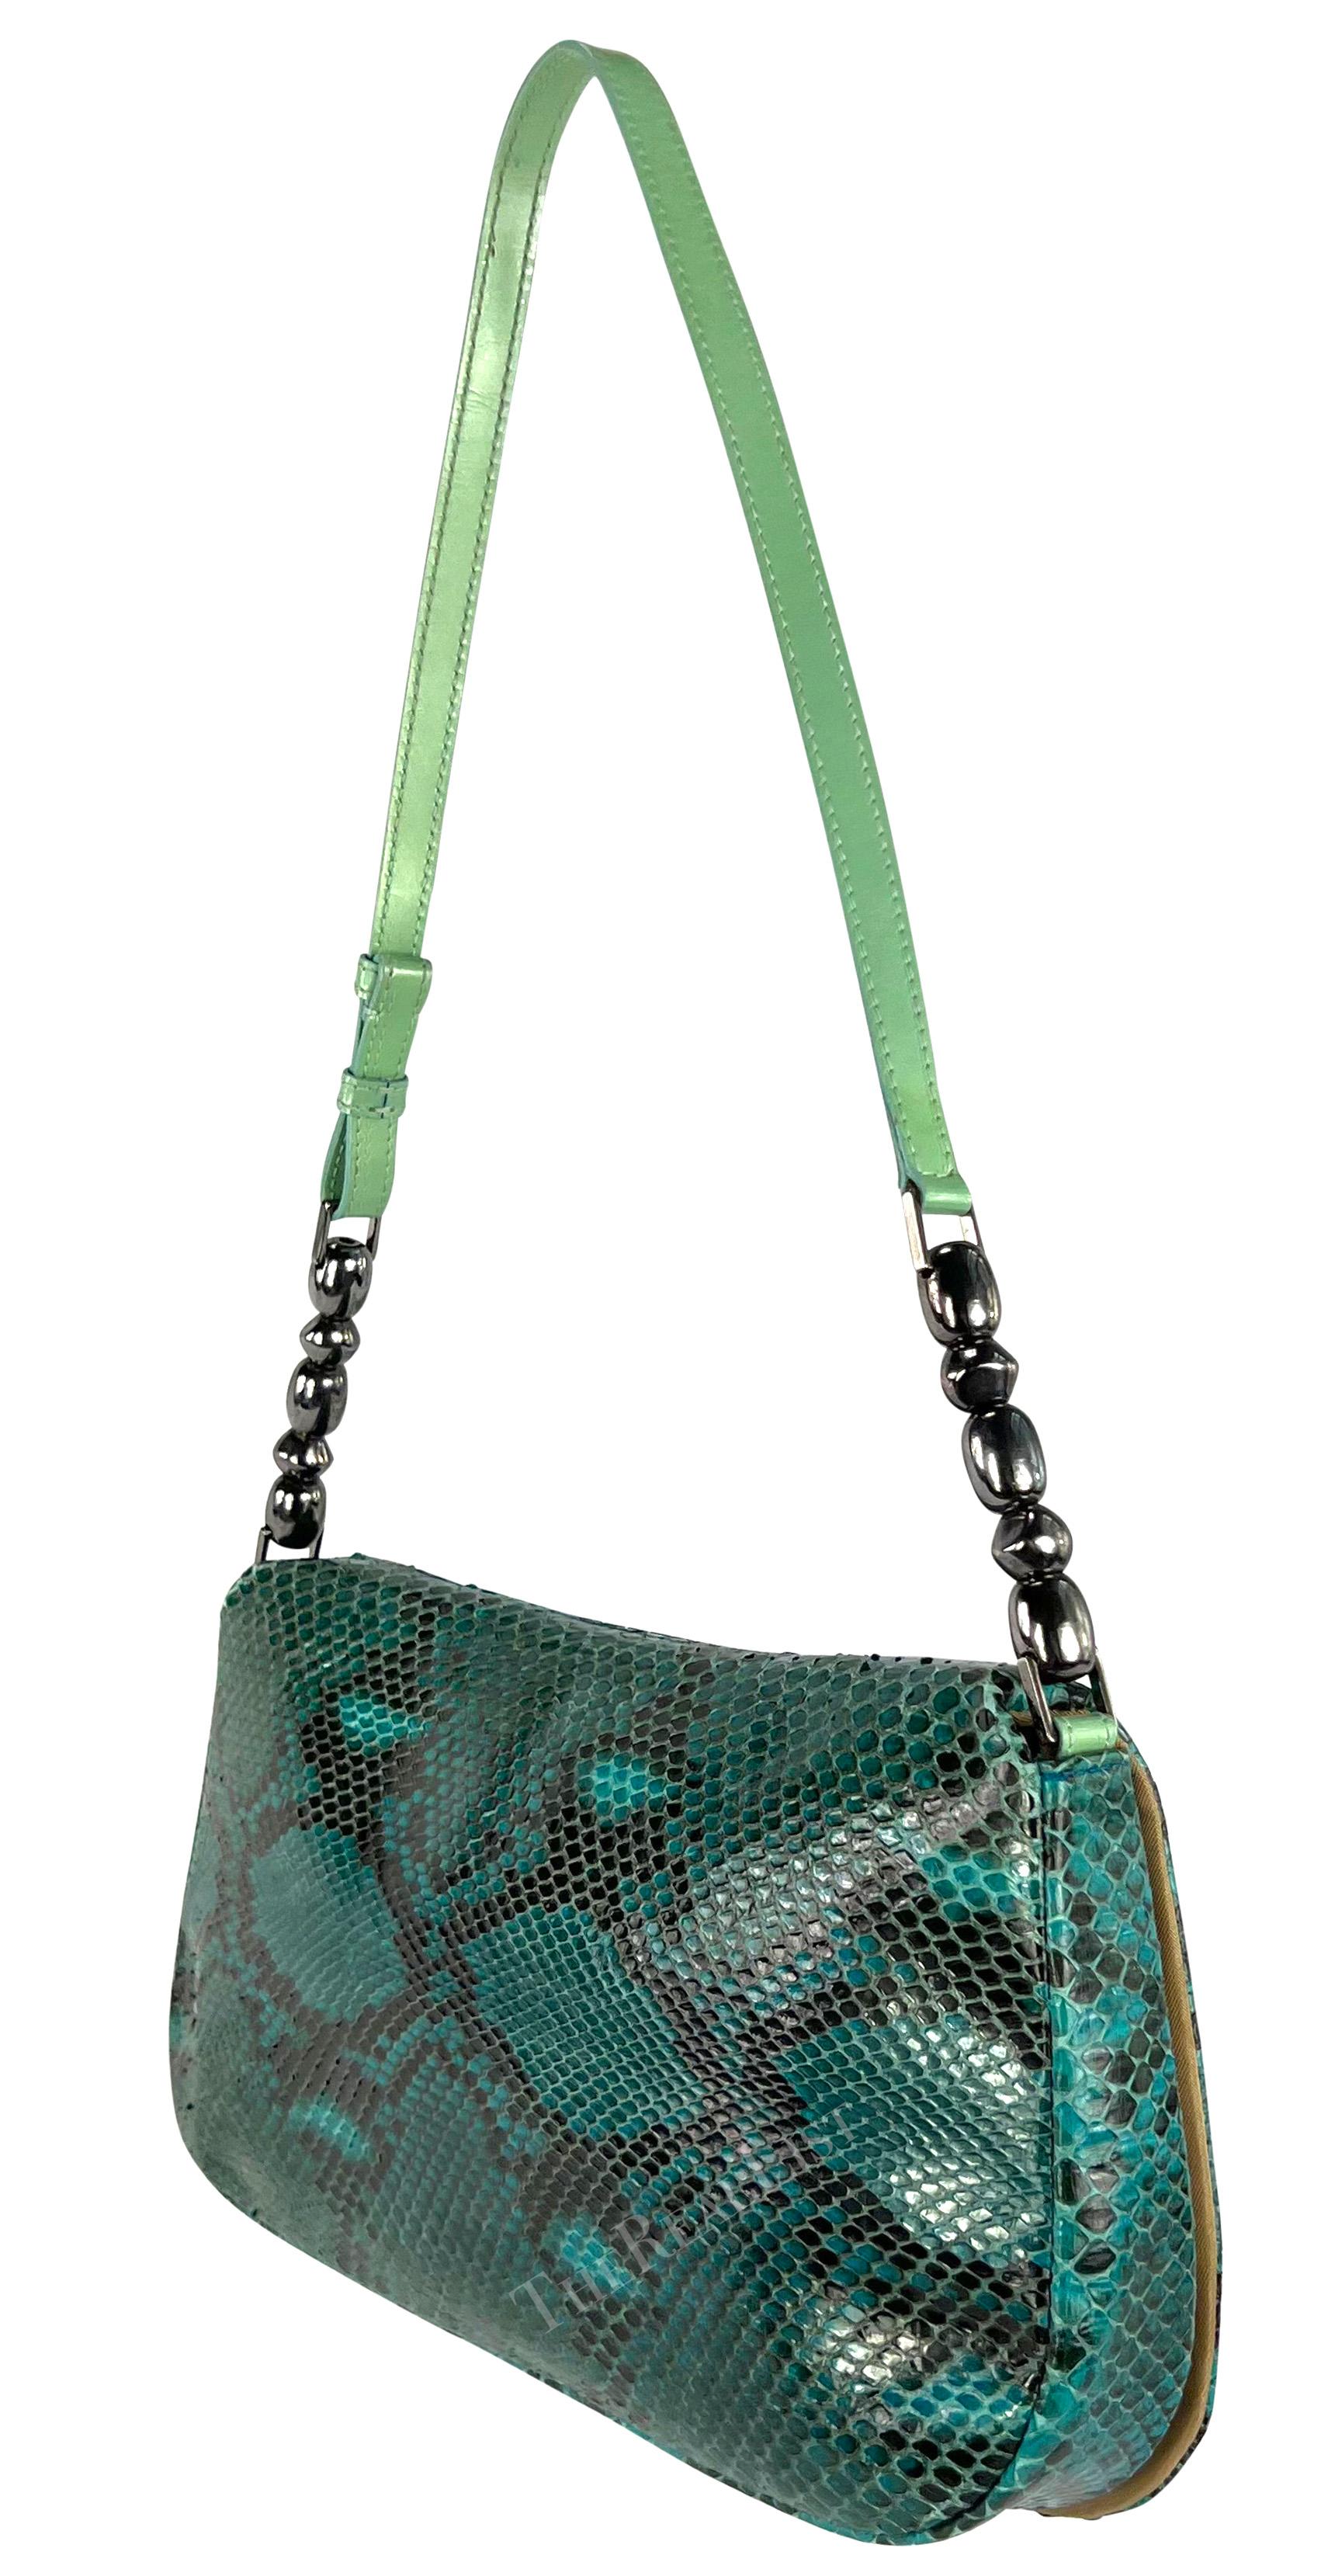 S/S 2000 Christian Dior by John Galliano Blue Snakeskin Malice Flap Shoulder Bag For Sale 3